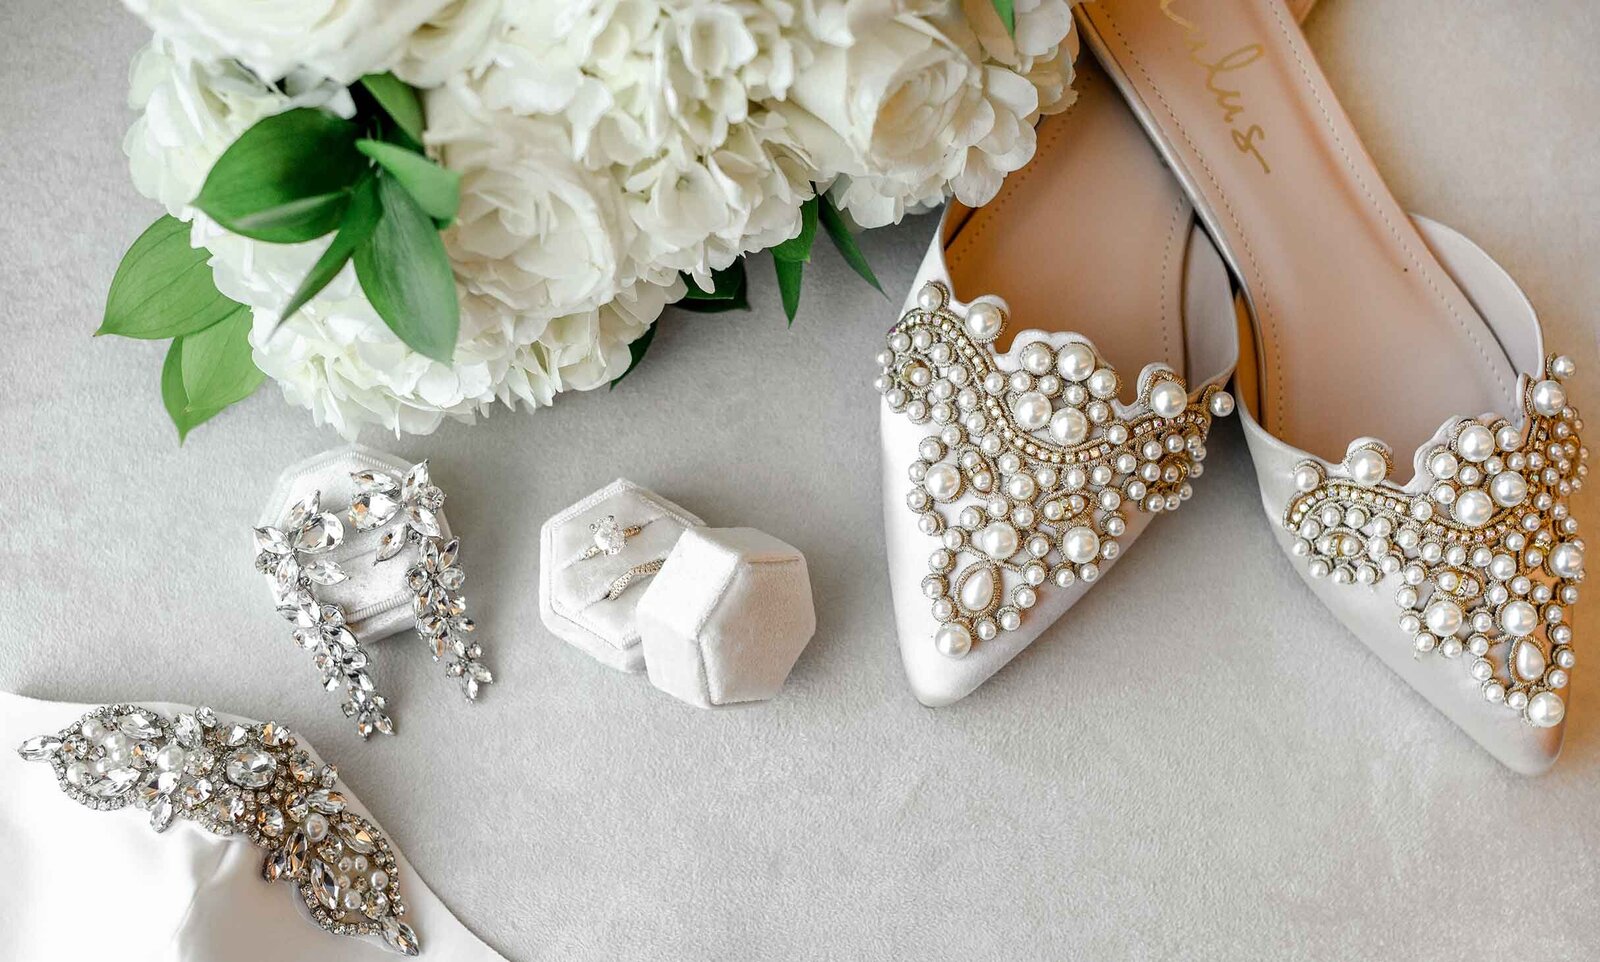 Flatlay of white wedding details including flower bouquet, ring, and jewelry